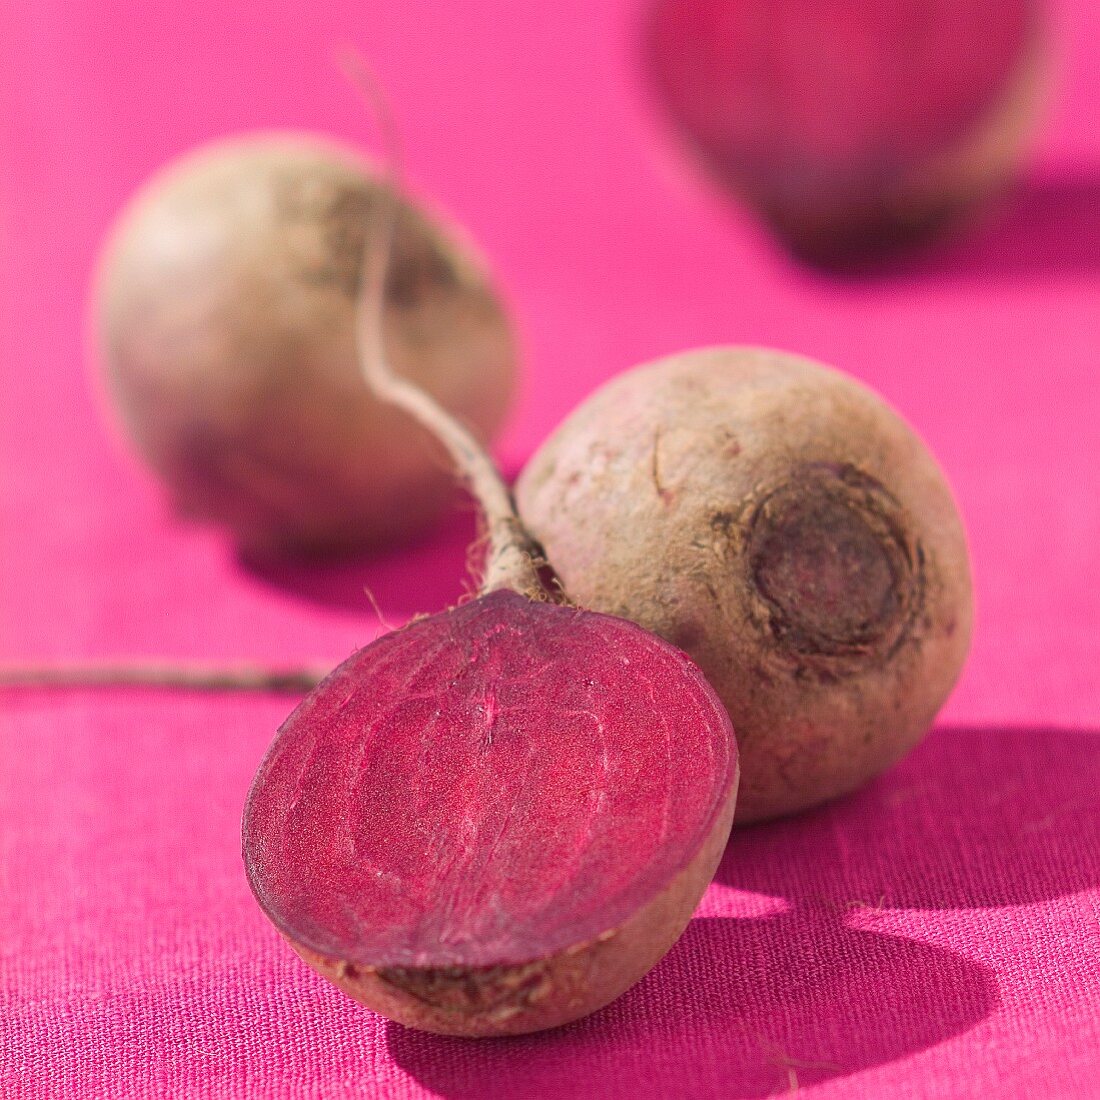 Beetroots from Gardanne